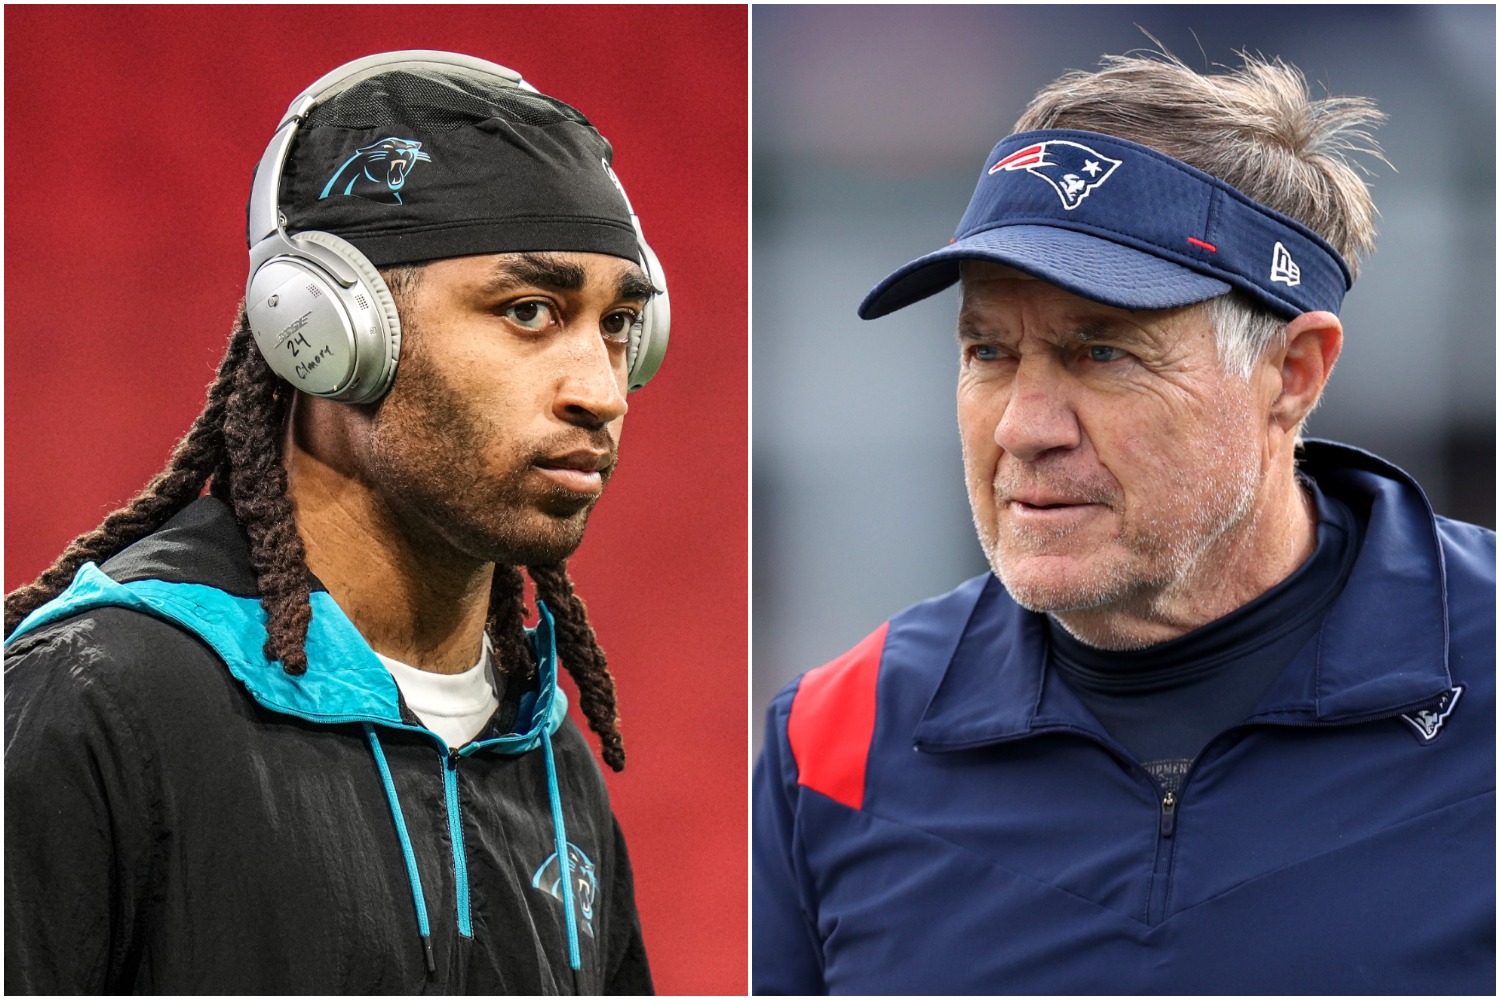 Carolina Panthers CB Stephon Gilmore wears his headphones while warming up as New England Patriots head coach Bill Belichick looks on after a win against the New York Jets.